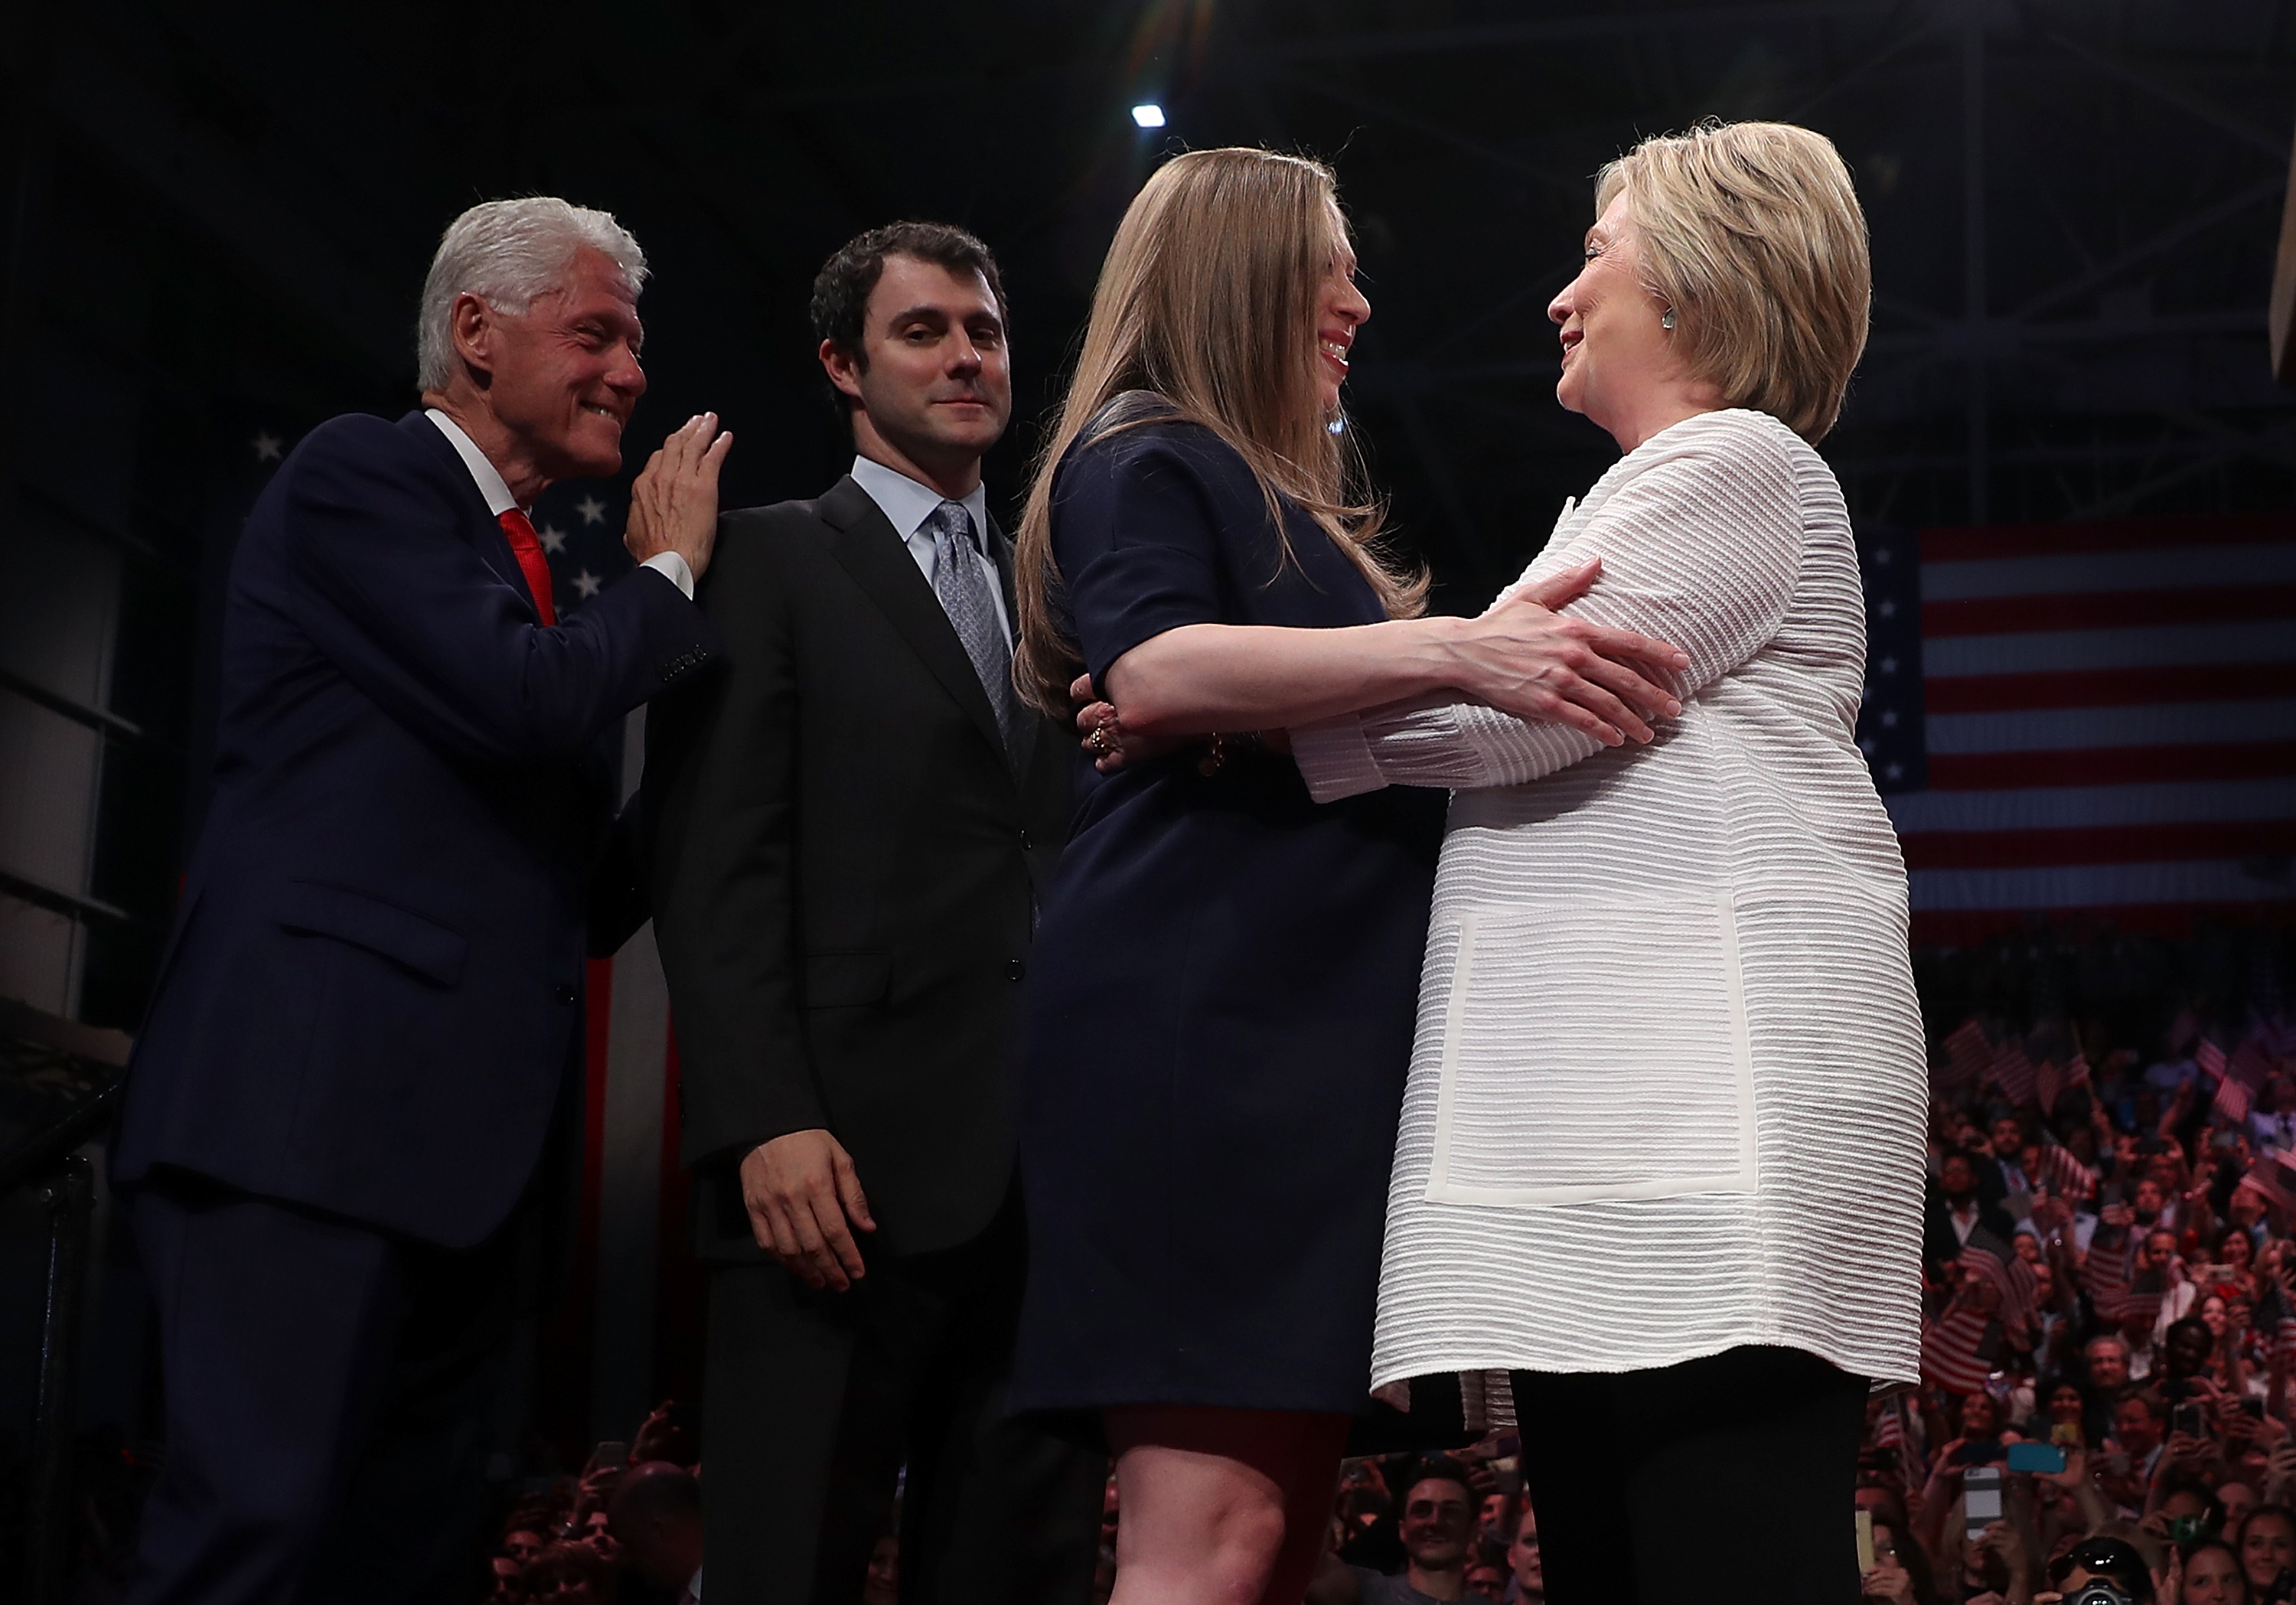 Former U.S. President Bill Clinton, Marc Mezvinsky and Chelsea Clinton greet Democratic presidential candidate former Secretary of State Hillary Clinton during a primary night event on June 7, 2016 in Brooklyn, New York. (Justin Sullivan/Getty Images)